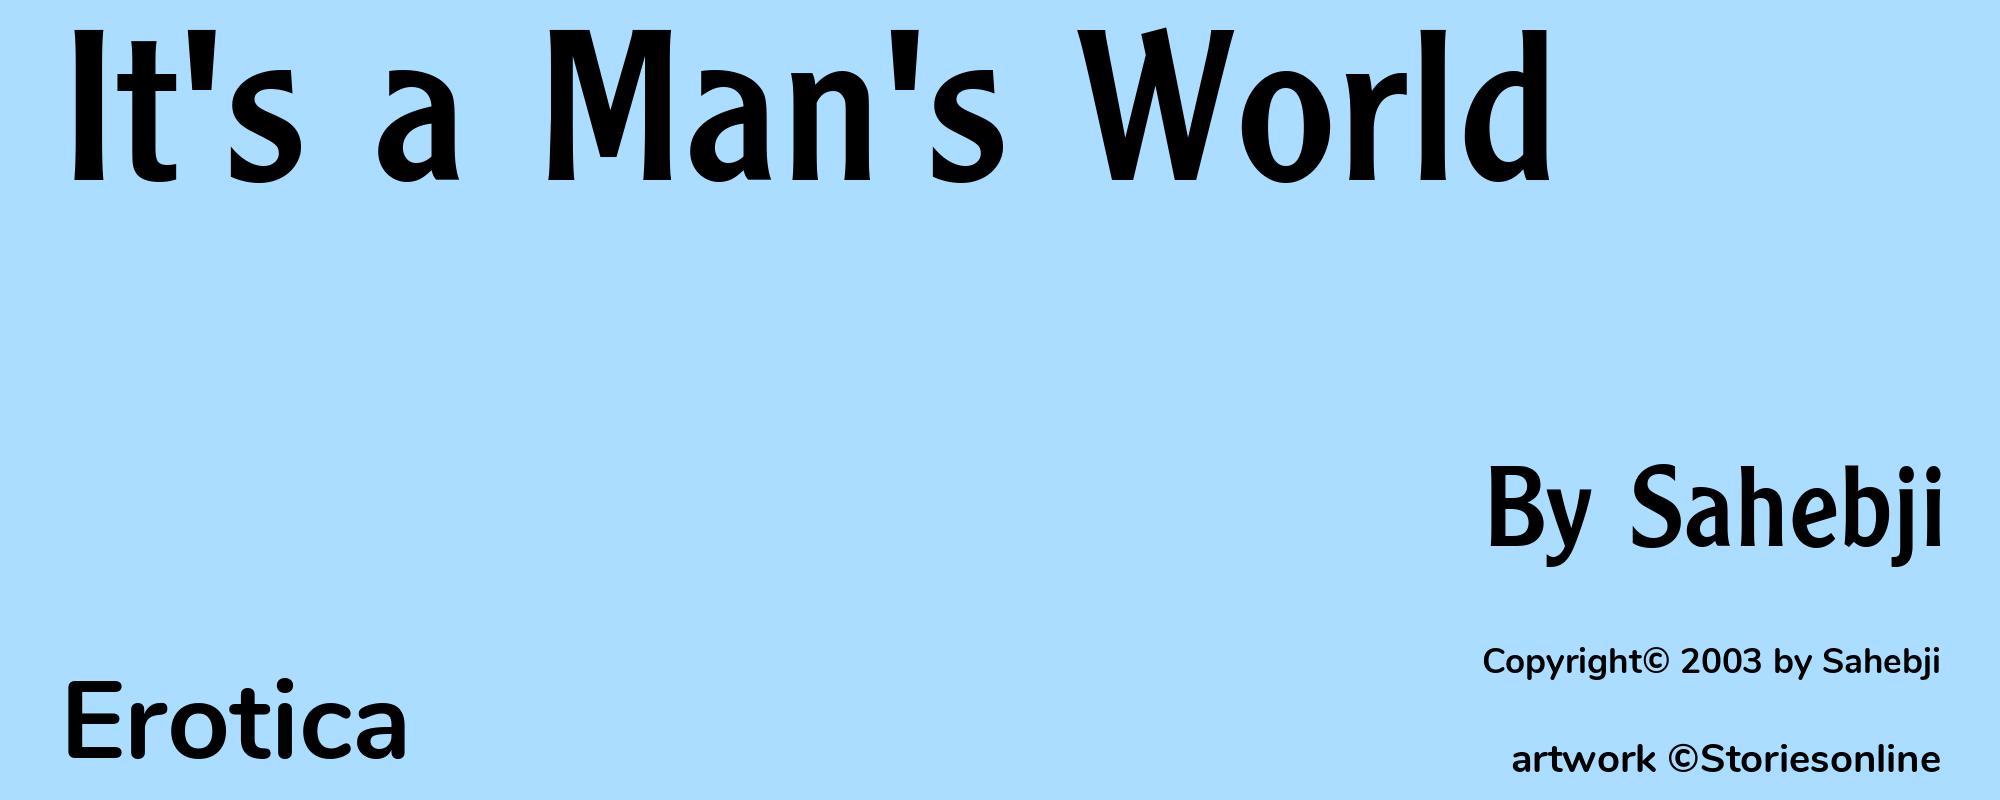 It's a Man's World - Cover